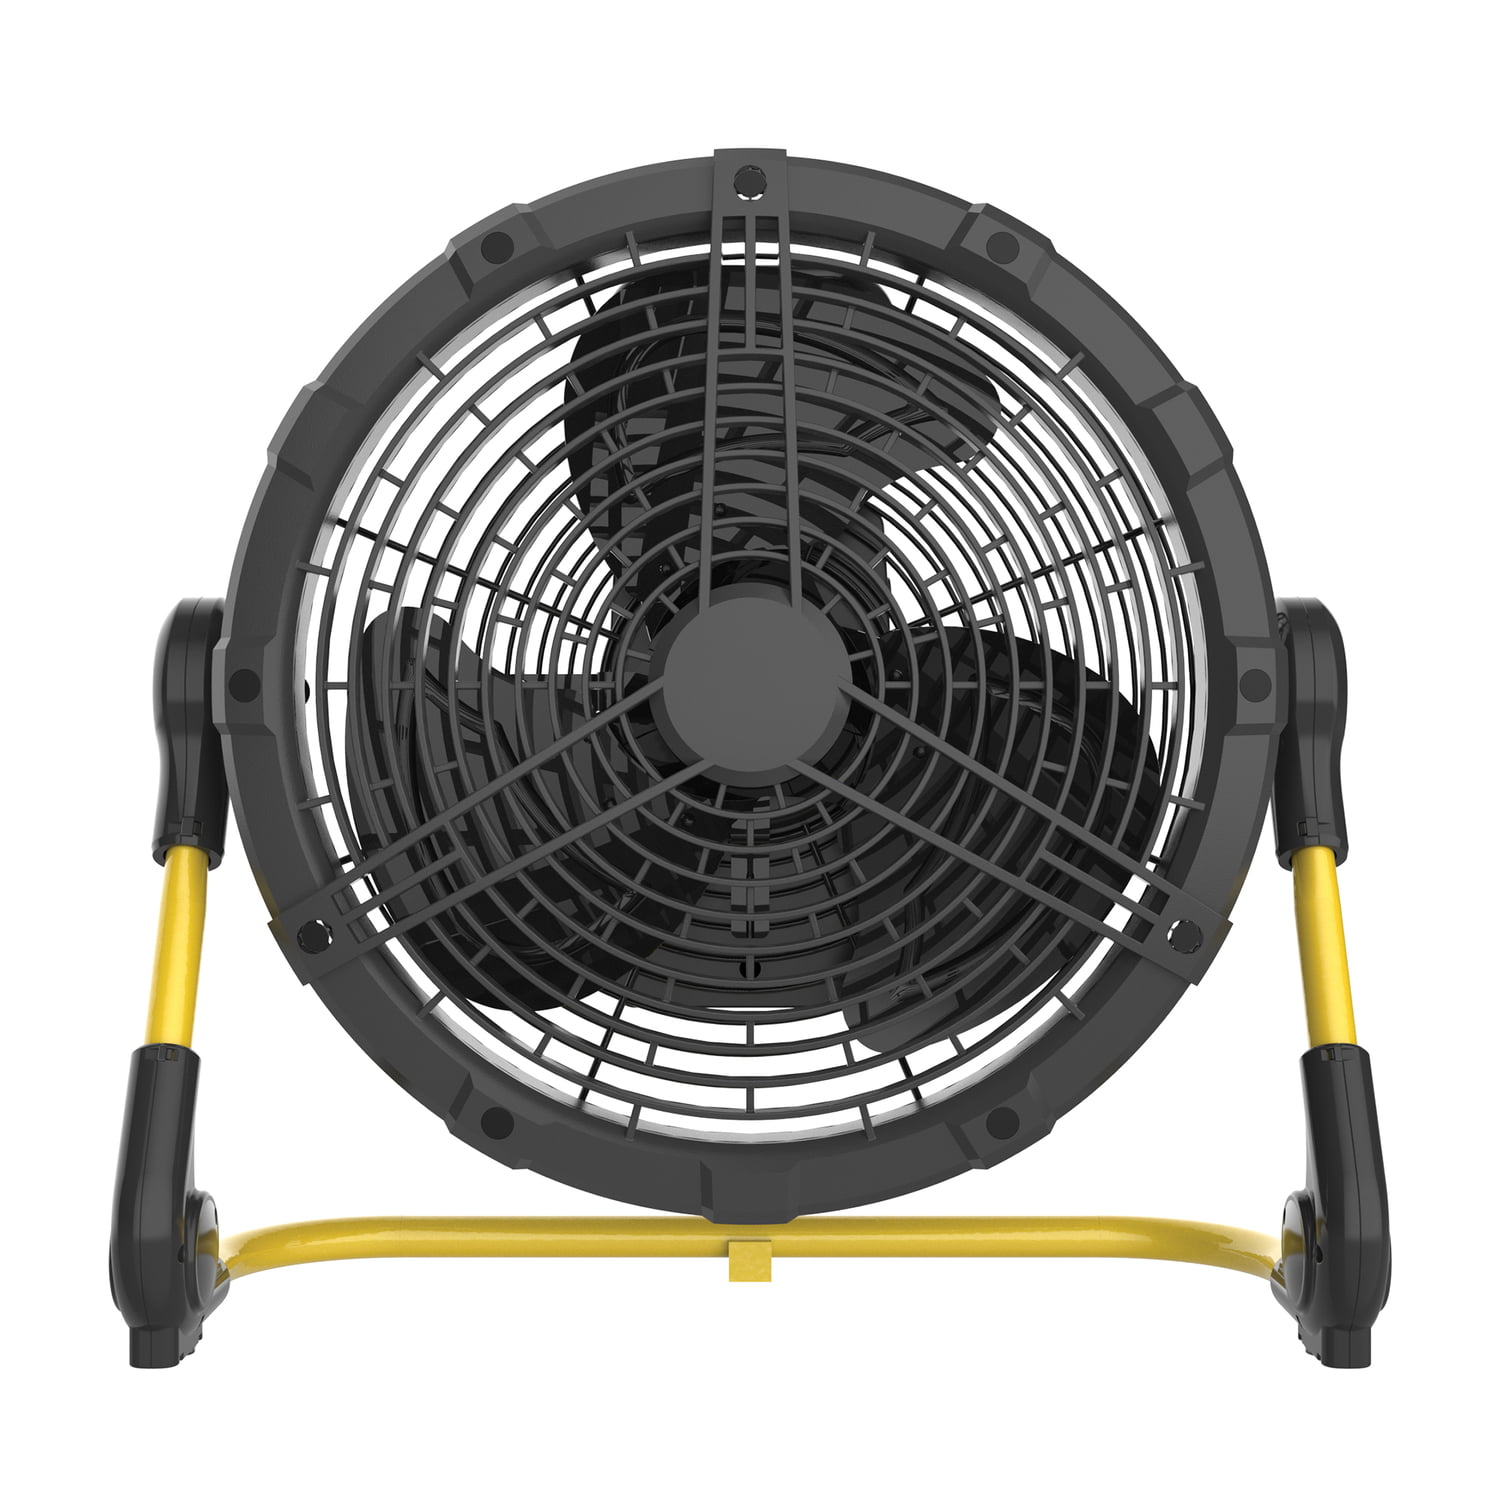 Rechargeable Outdoor Misting Fan Geek Aire Battery Operated Fan Portable High Velocity Metal Floor Fan with 15000mAh Detachable Battery & Misting Function Camping 16 inch More Ideal for Patio